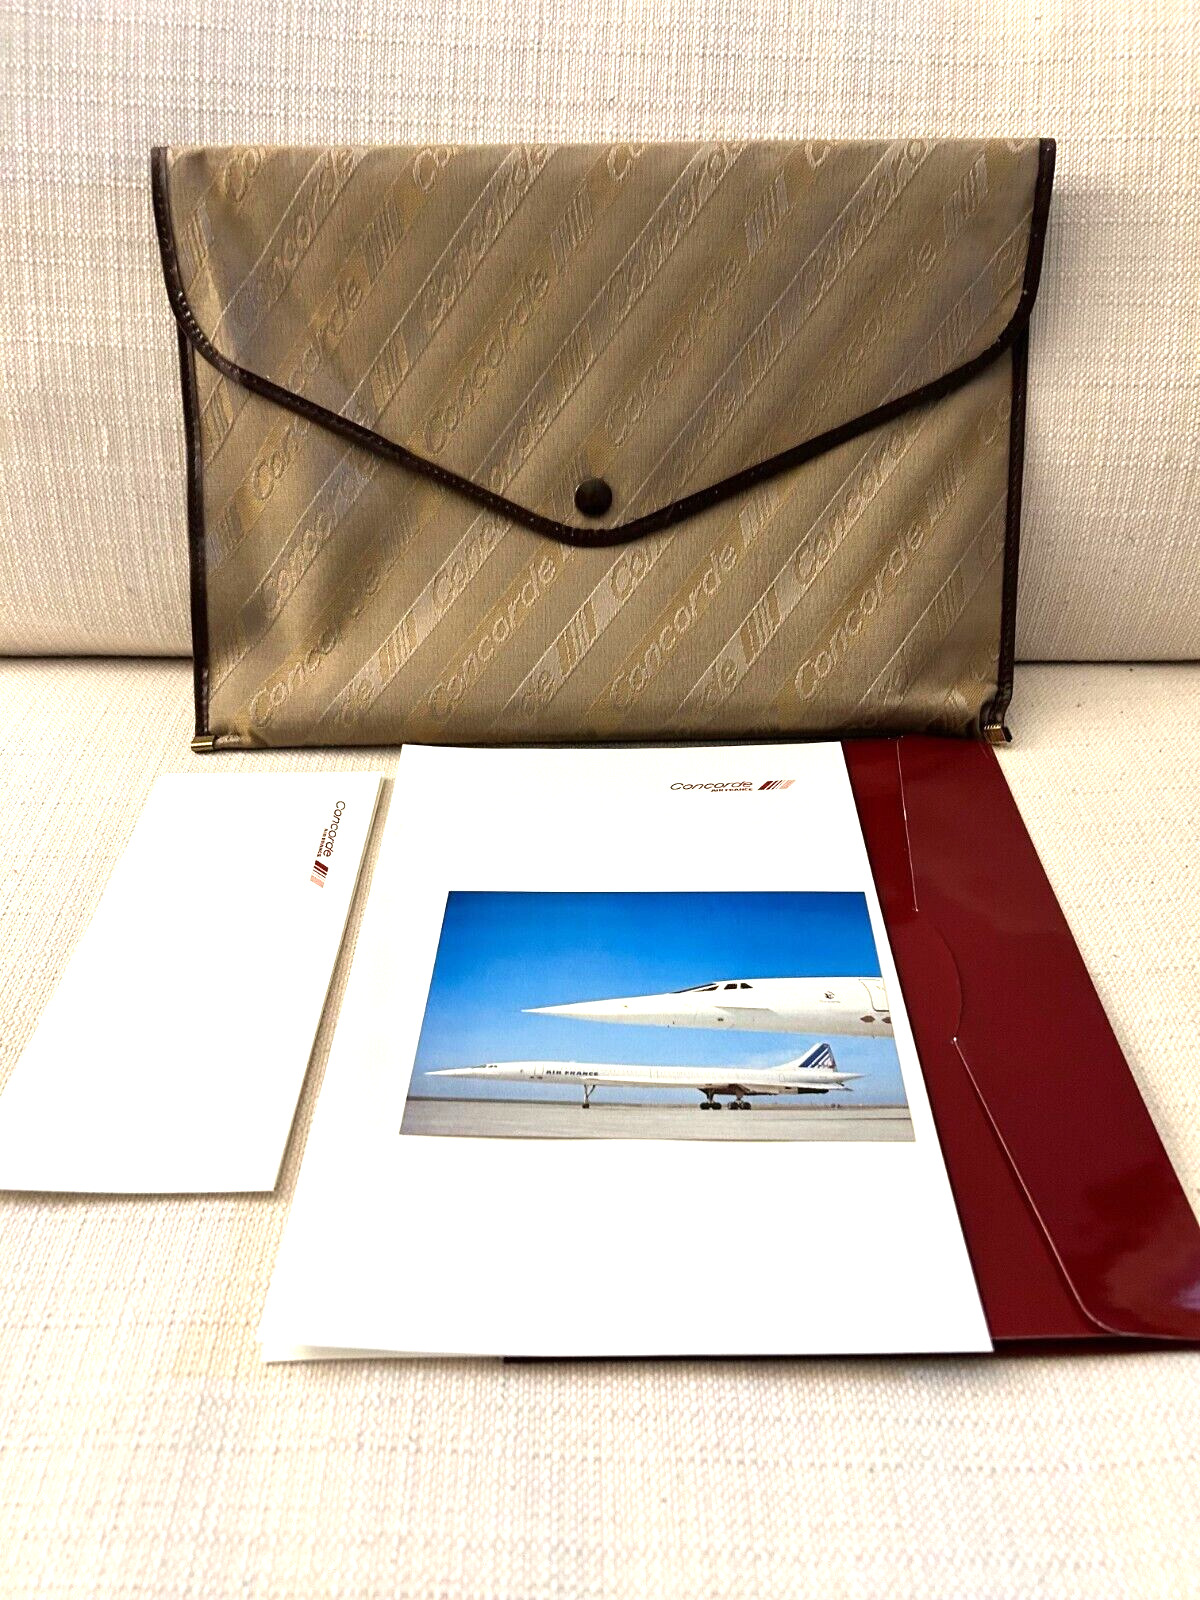 Concorde Air France Document Case by Charles Frantz with stationery 10”x14” VNTG